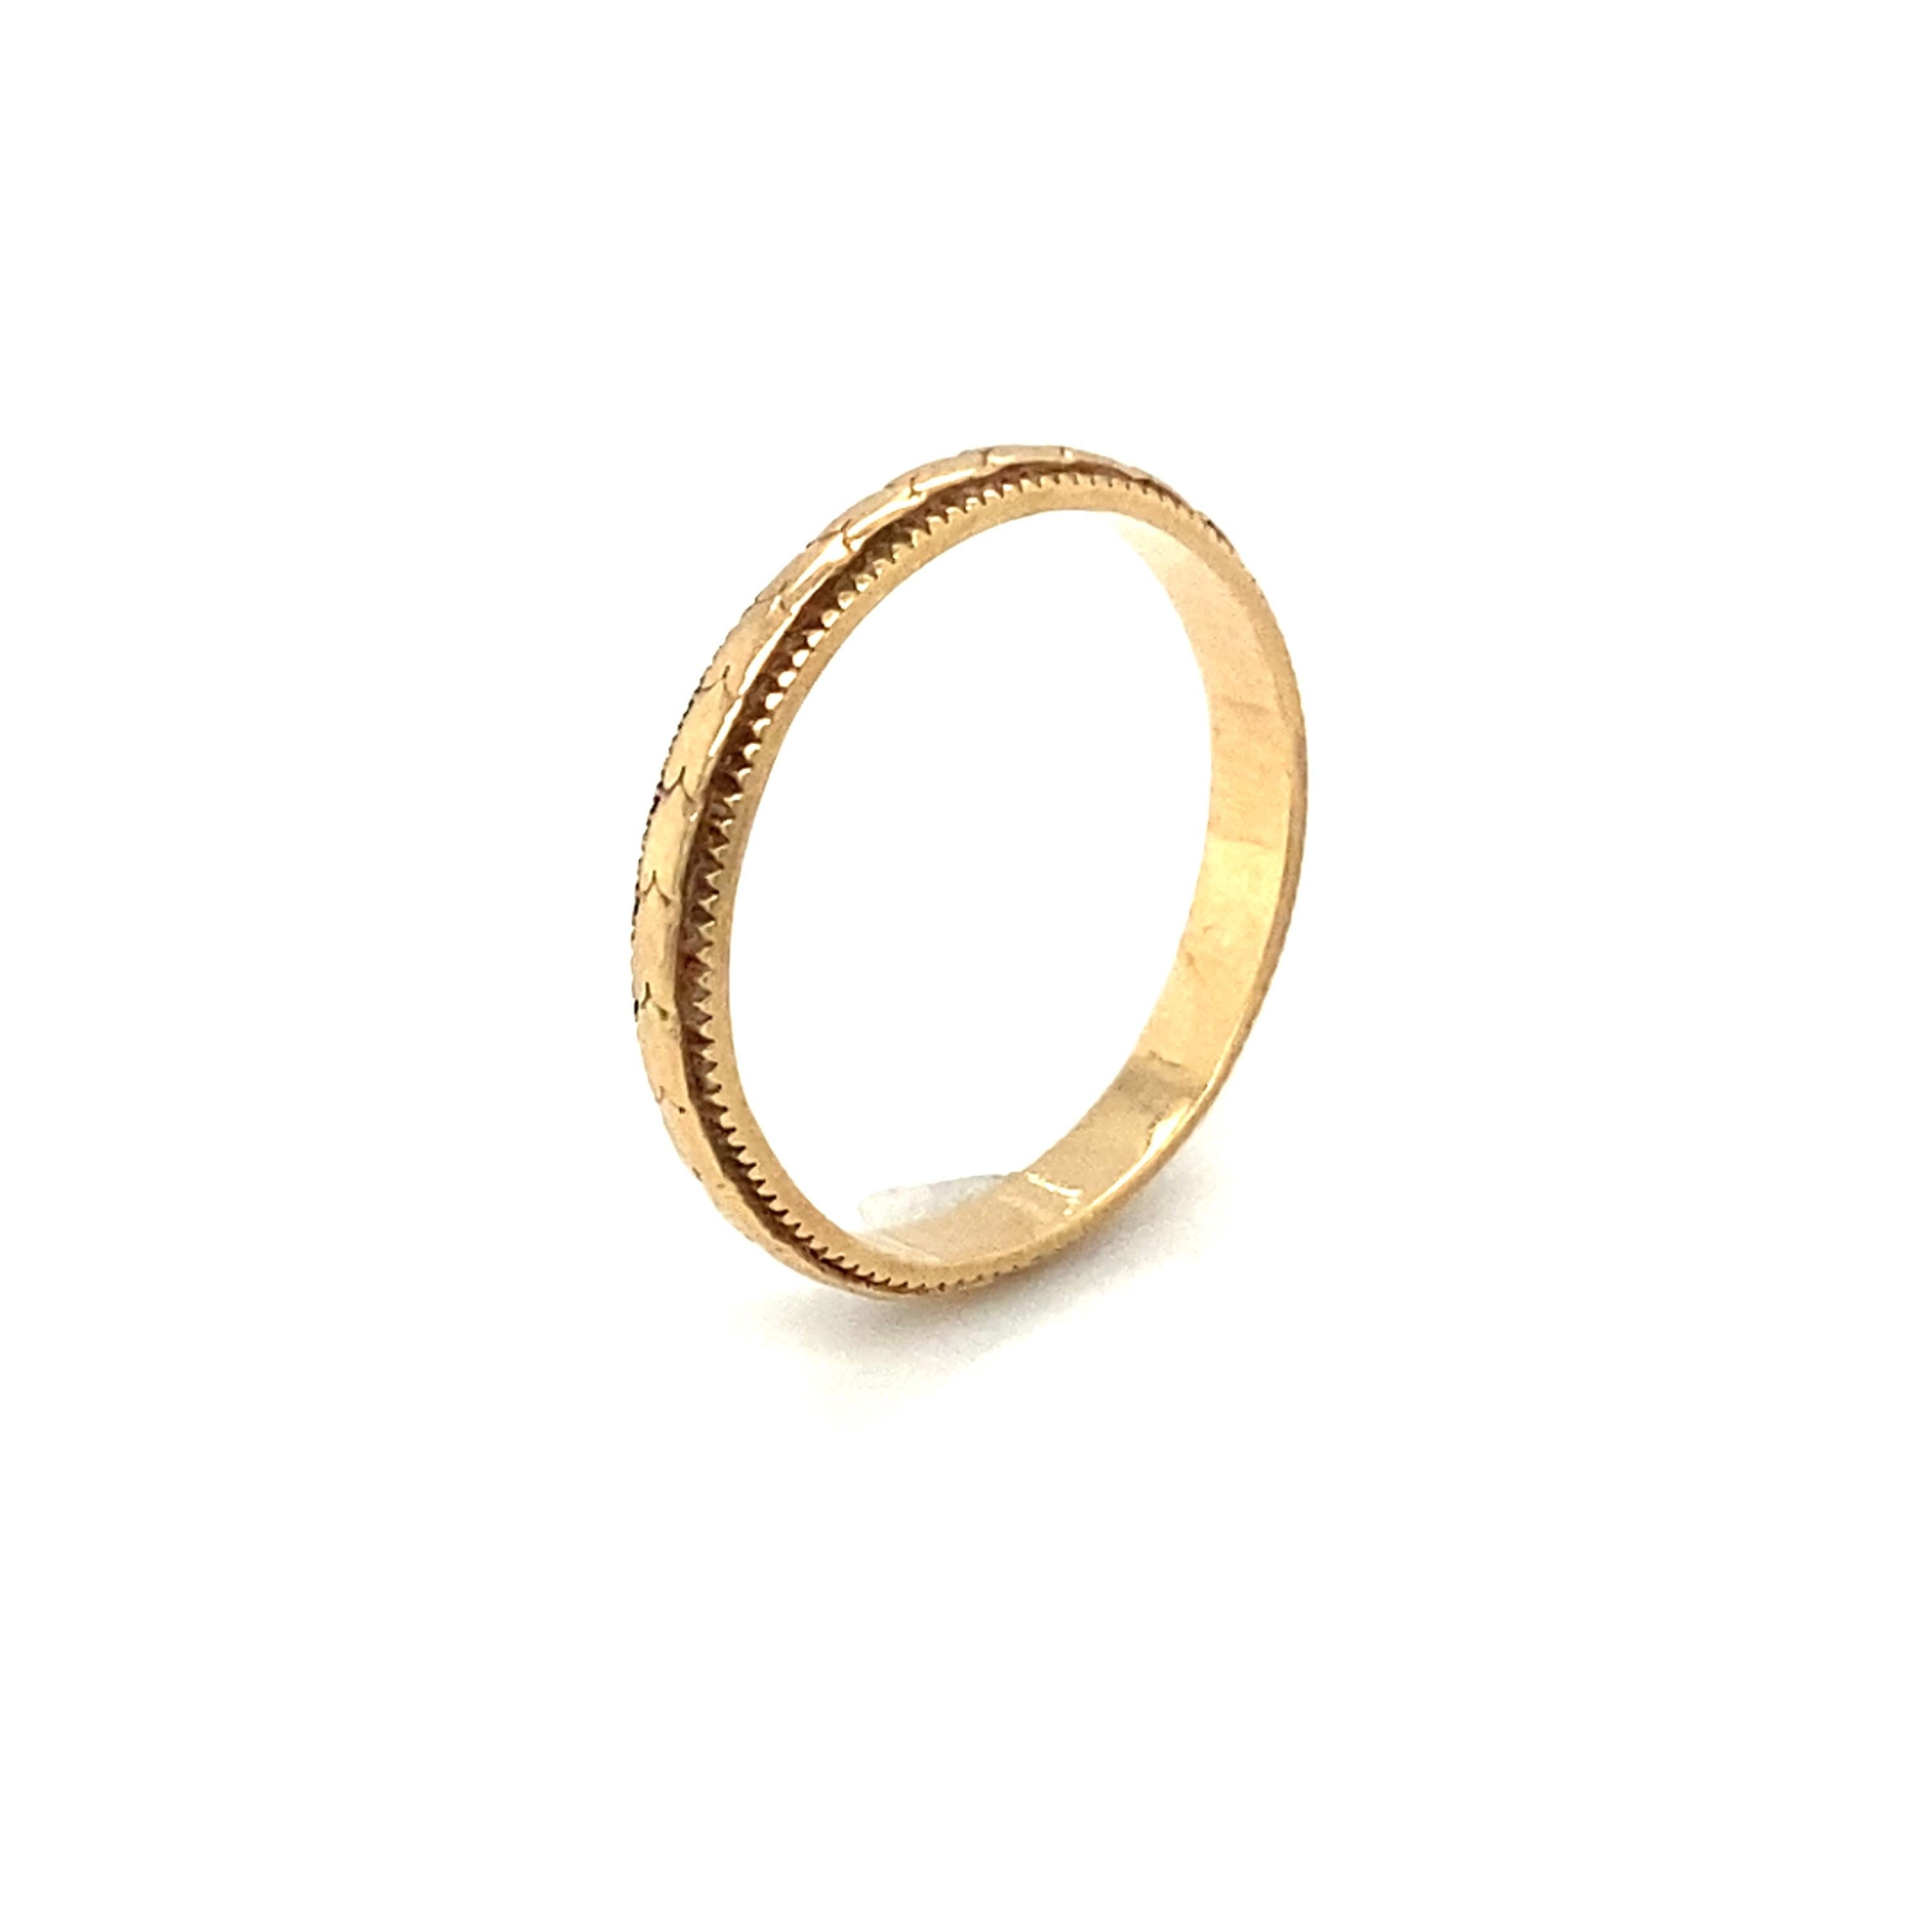 Item Details:
Metal type: 14 Karat Yellow Gold 
Weight: 1.7 grams 
Size: 5 (resizable)
Hallmarked 14K

Item Features:
This elegant yet simple Art Deco band ring was made in the 1920s. This ring is very well made and in great condition with beautiful